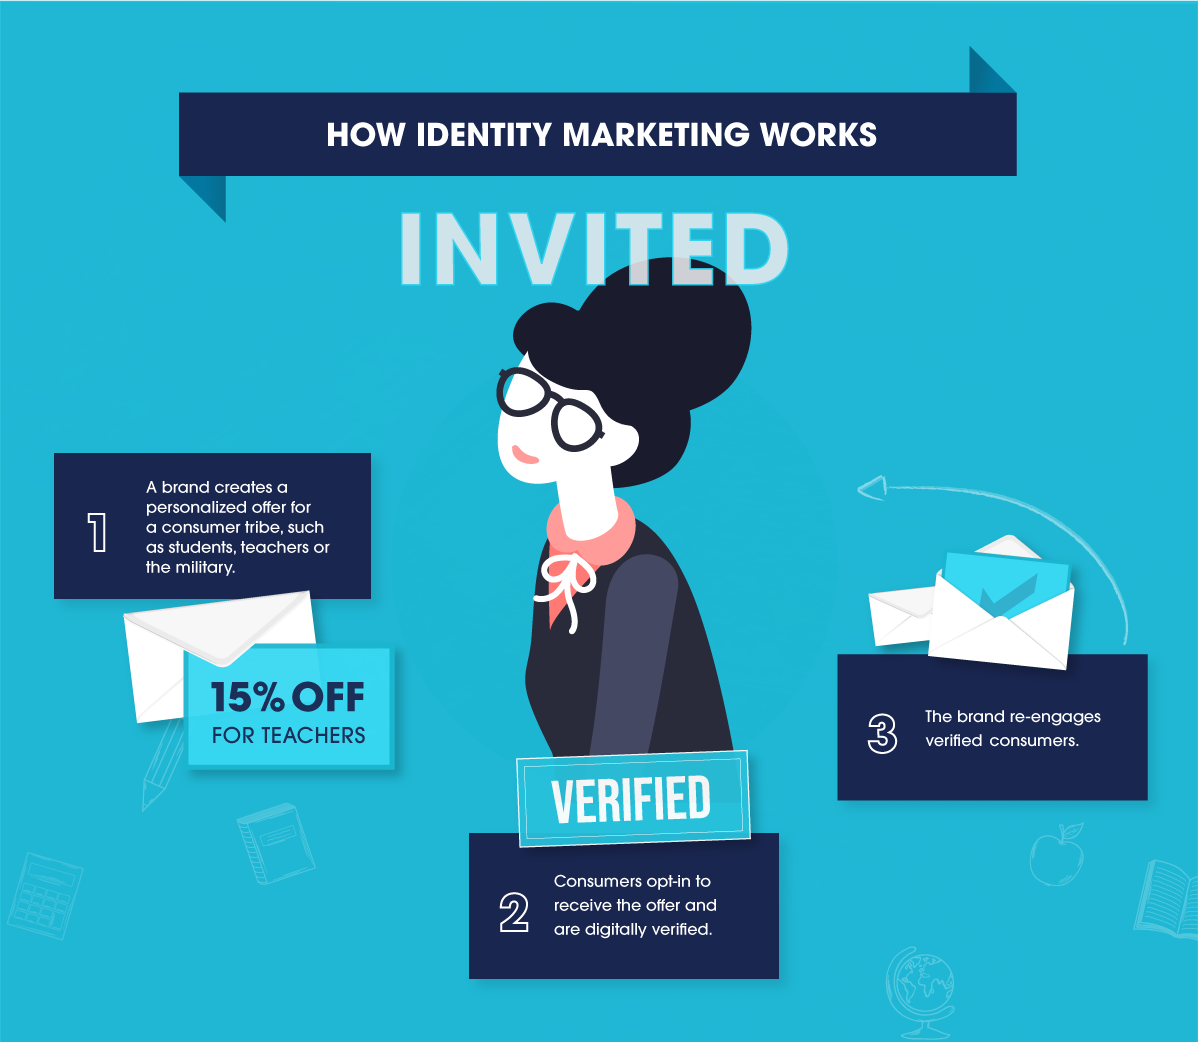 How Identity Marketing Works. 1. A brand creates a personalized offer for a consumer tribe, such as students, teachers, or the military. (15% off for Teachers) 2. VERIFIED. Consumers opt-in to receive the offer and are digitally verified. 3. The brand re-engages verified consumers.